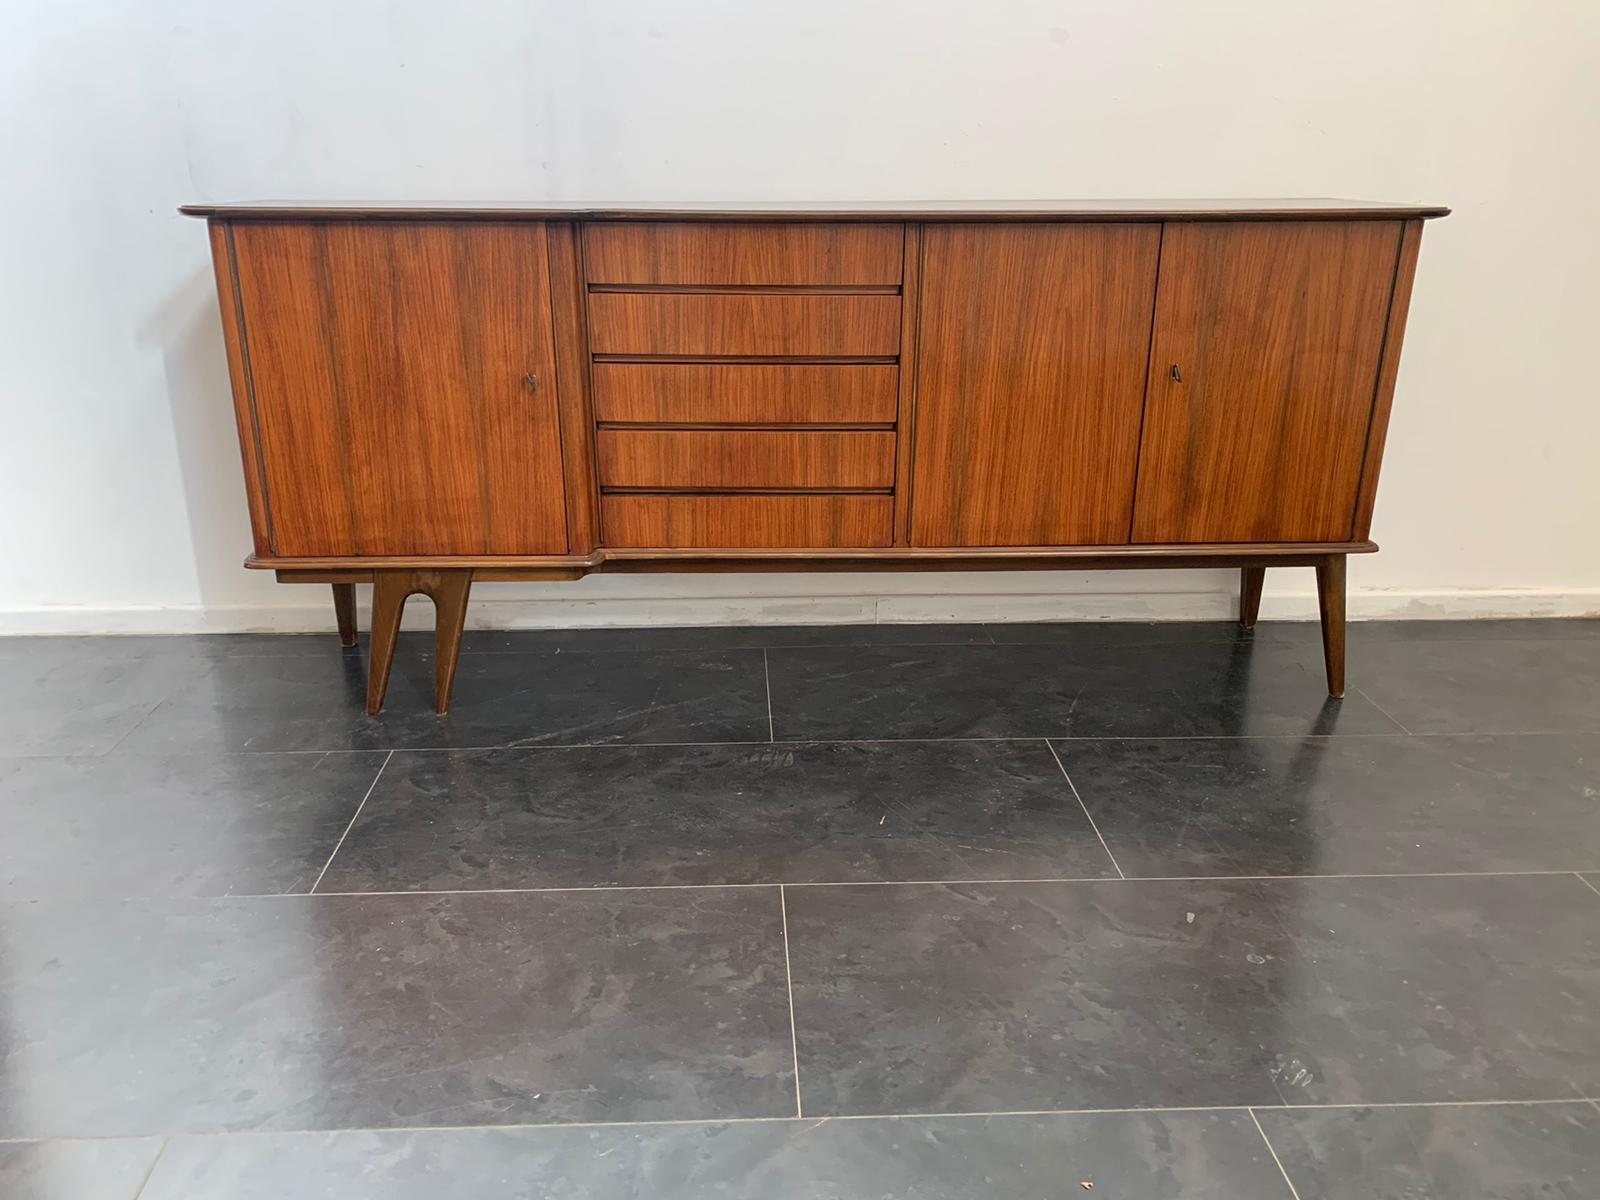 Demountable rosewood sideboard, 1960s
Packaging with bubble wrap and cardboard boxes is included. If the wooden packaging is needed (crates or boxes) for US and International Shipping, it's required a separate cost (will be quoted separately).